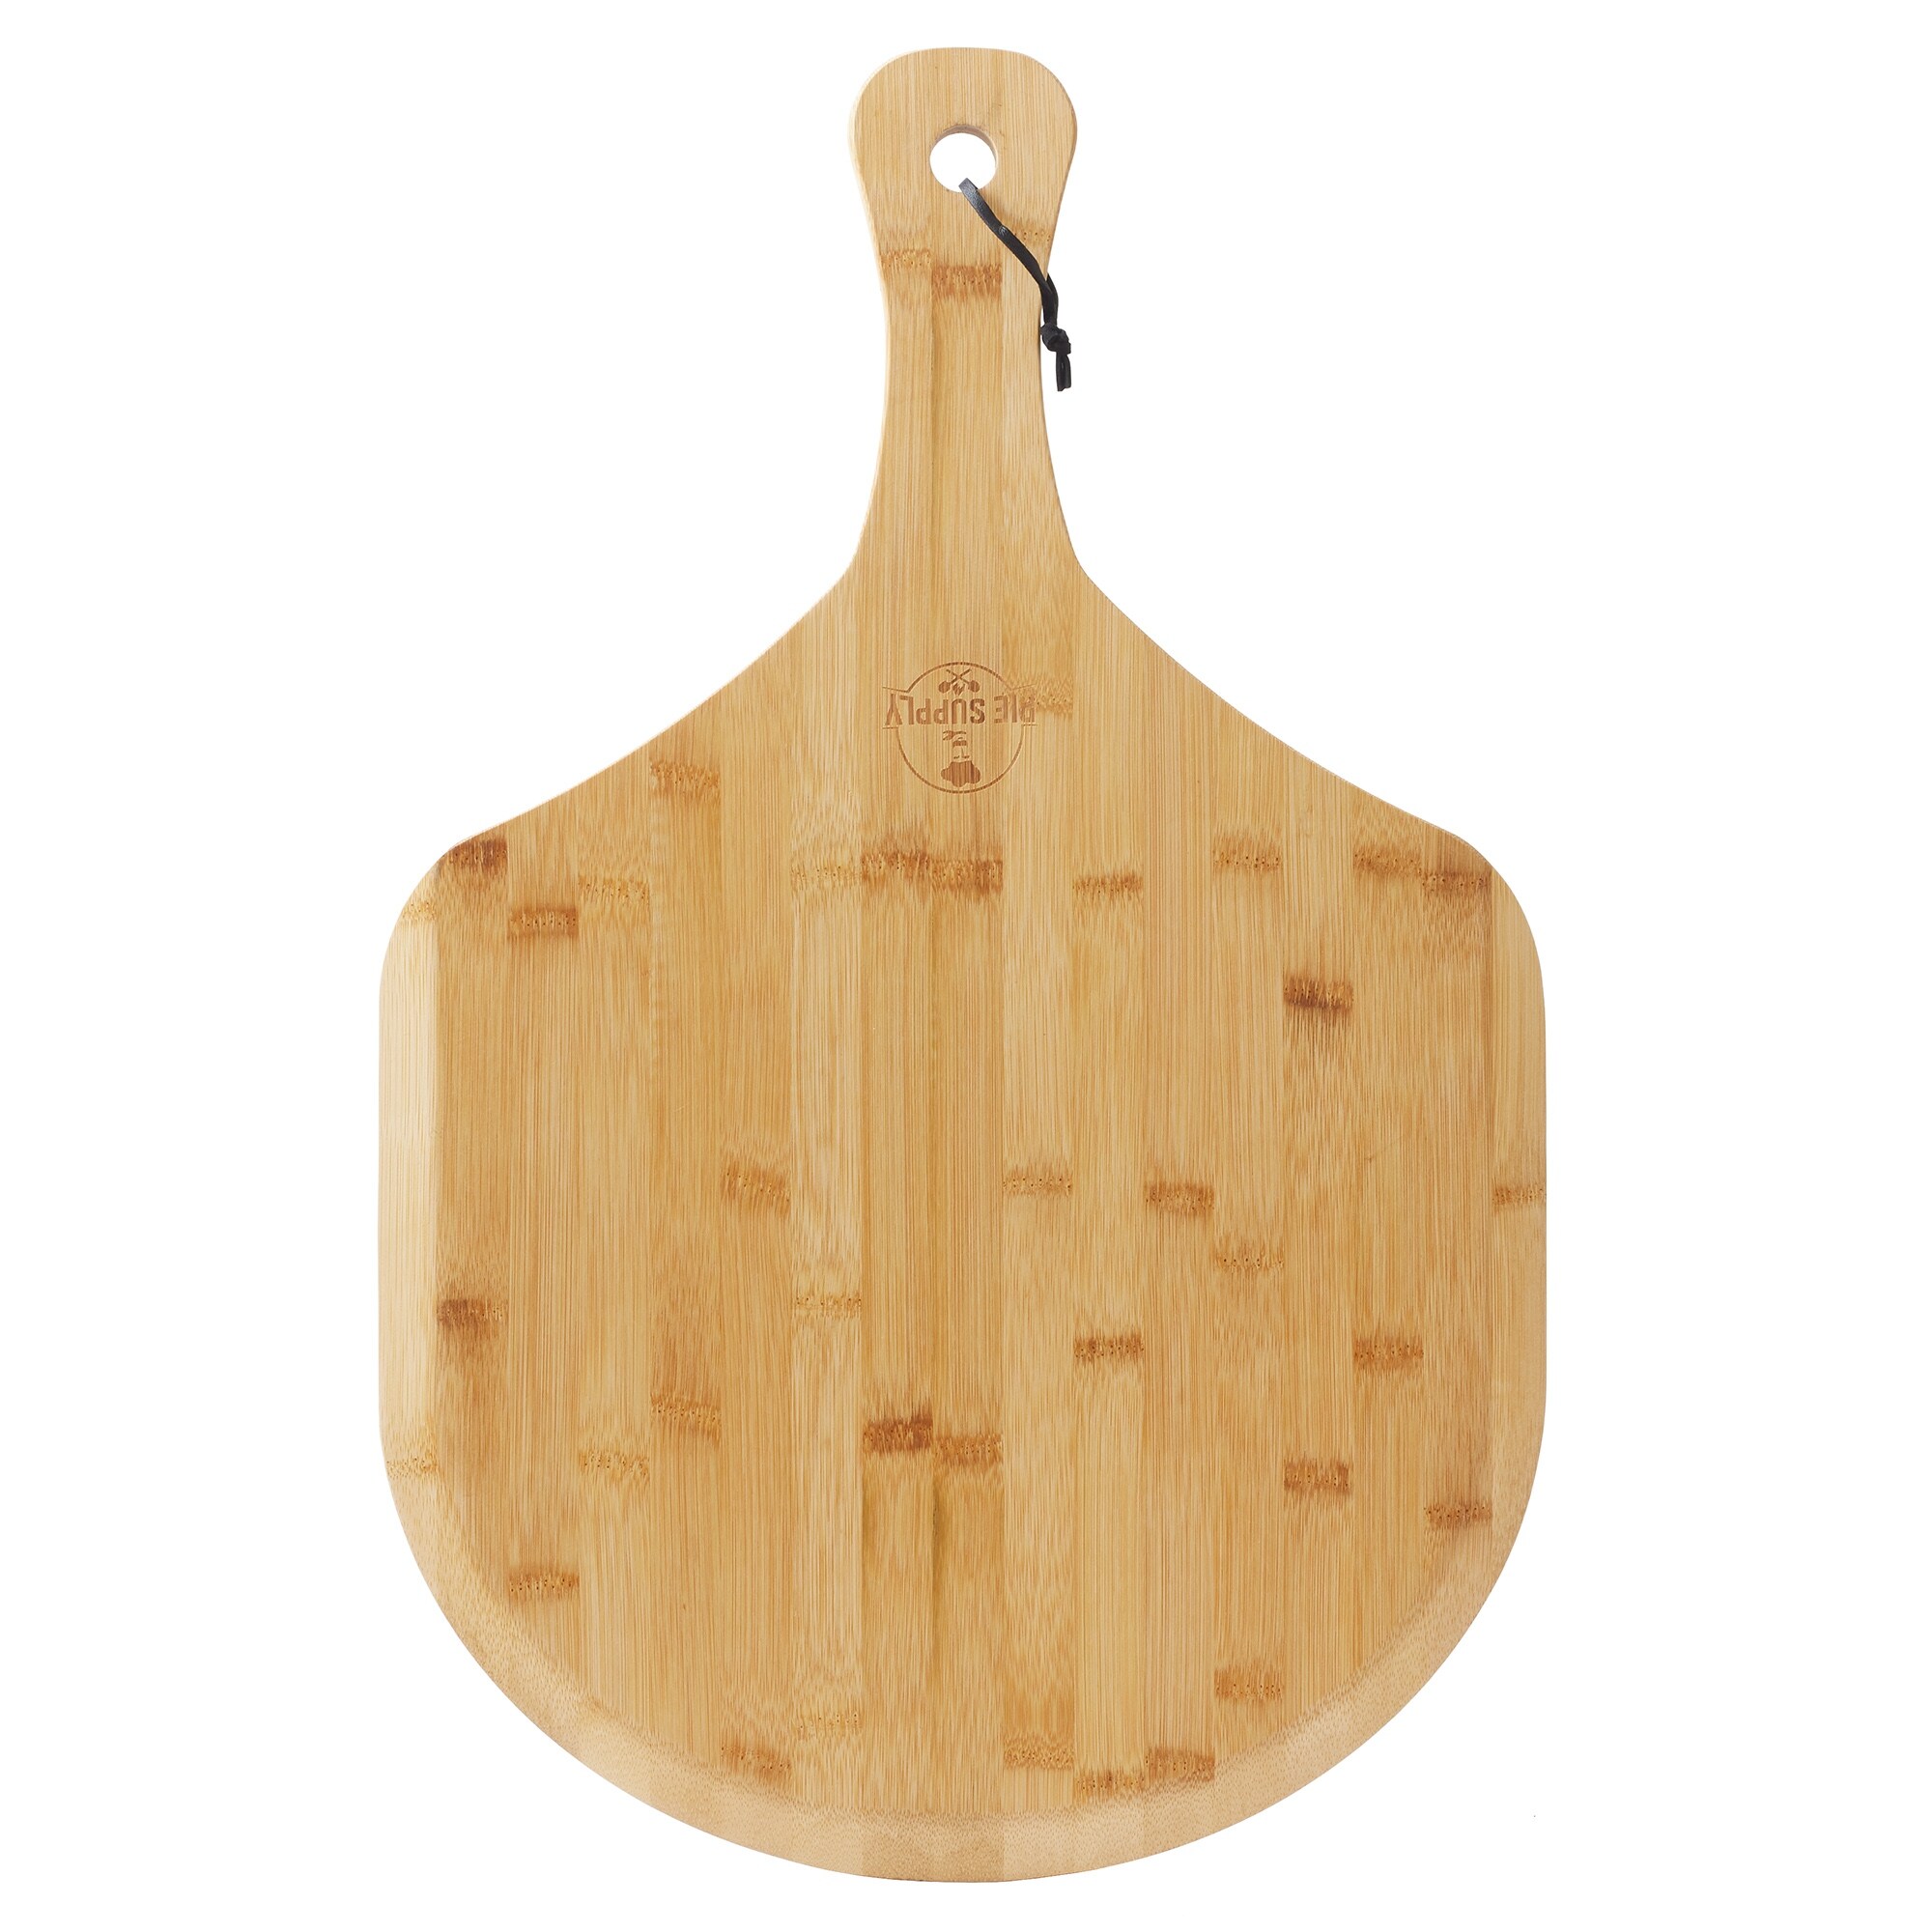 Wooden Sliding Pizza Peel with Handle Hanging Pizza Cutting Board